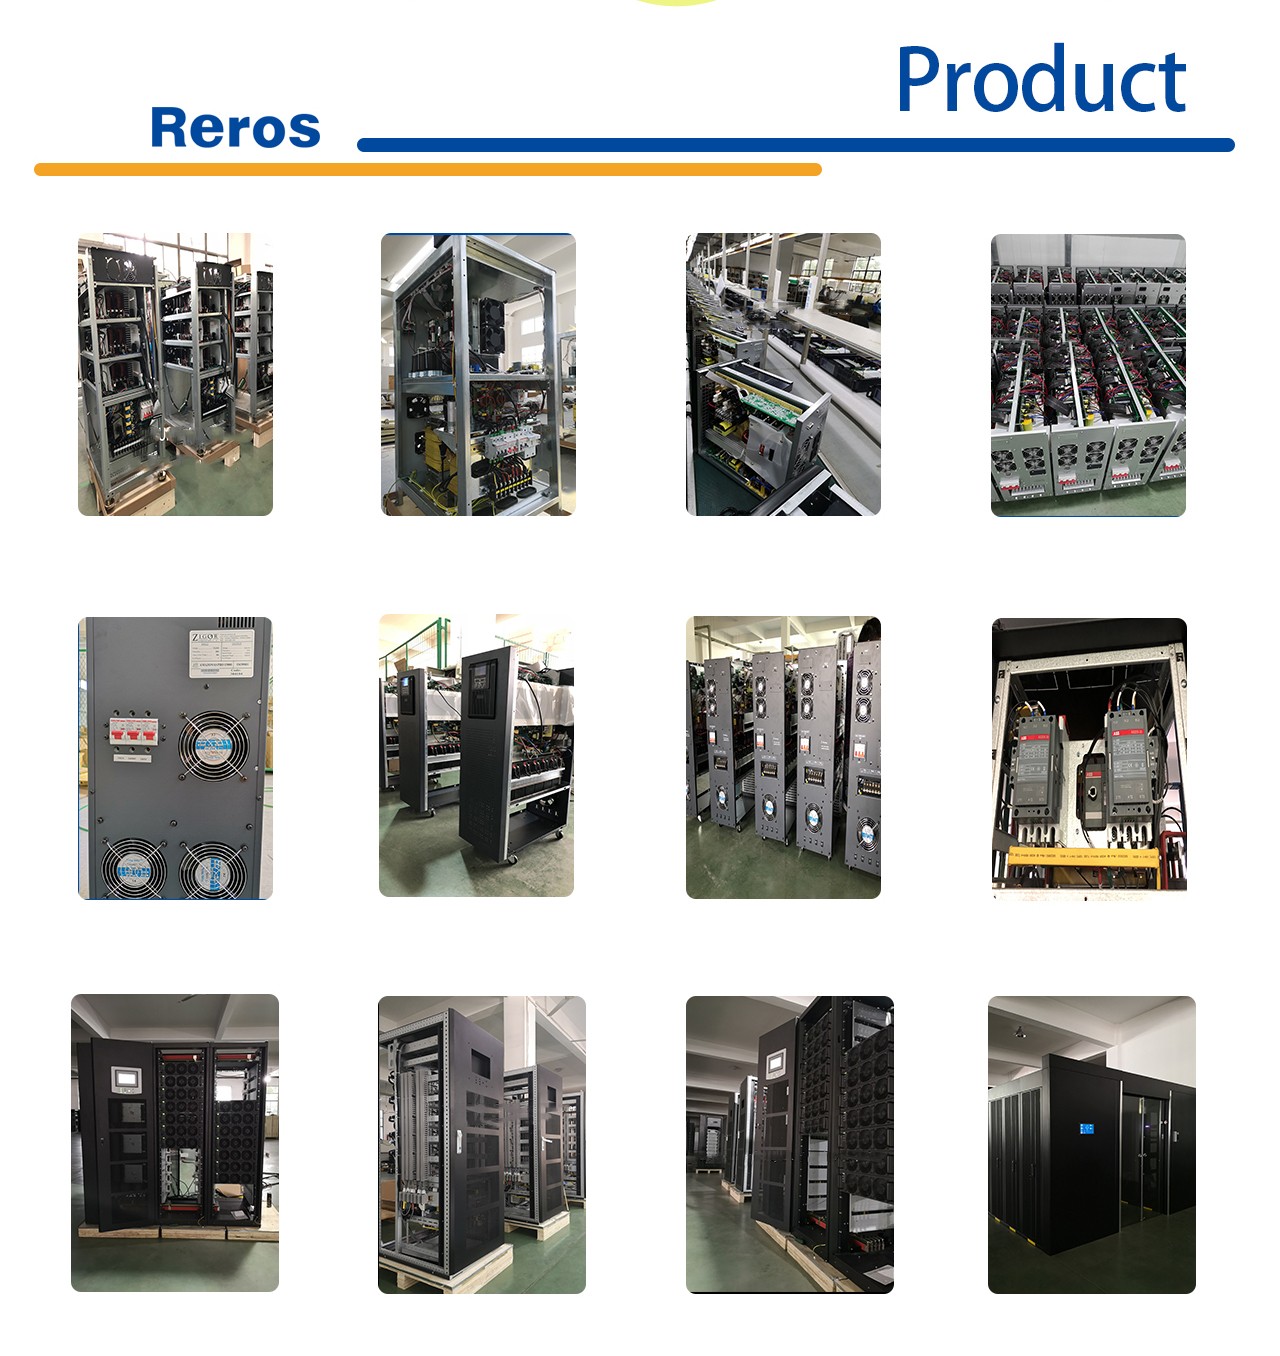 6-50K Reros UPS online transformer base power supply 3/3 low frequency 3B